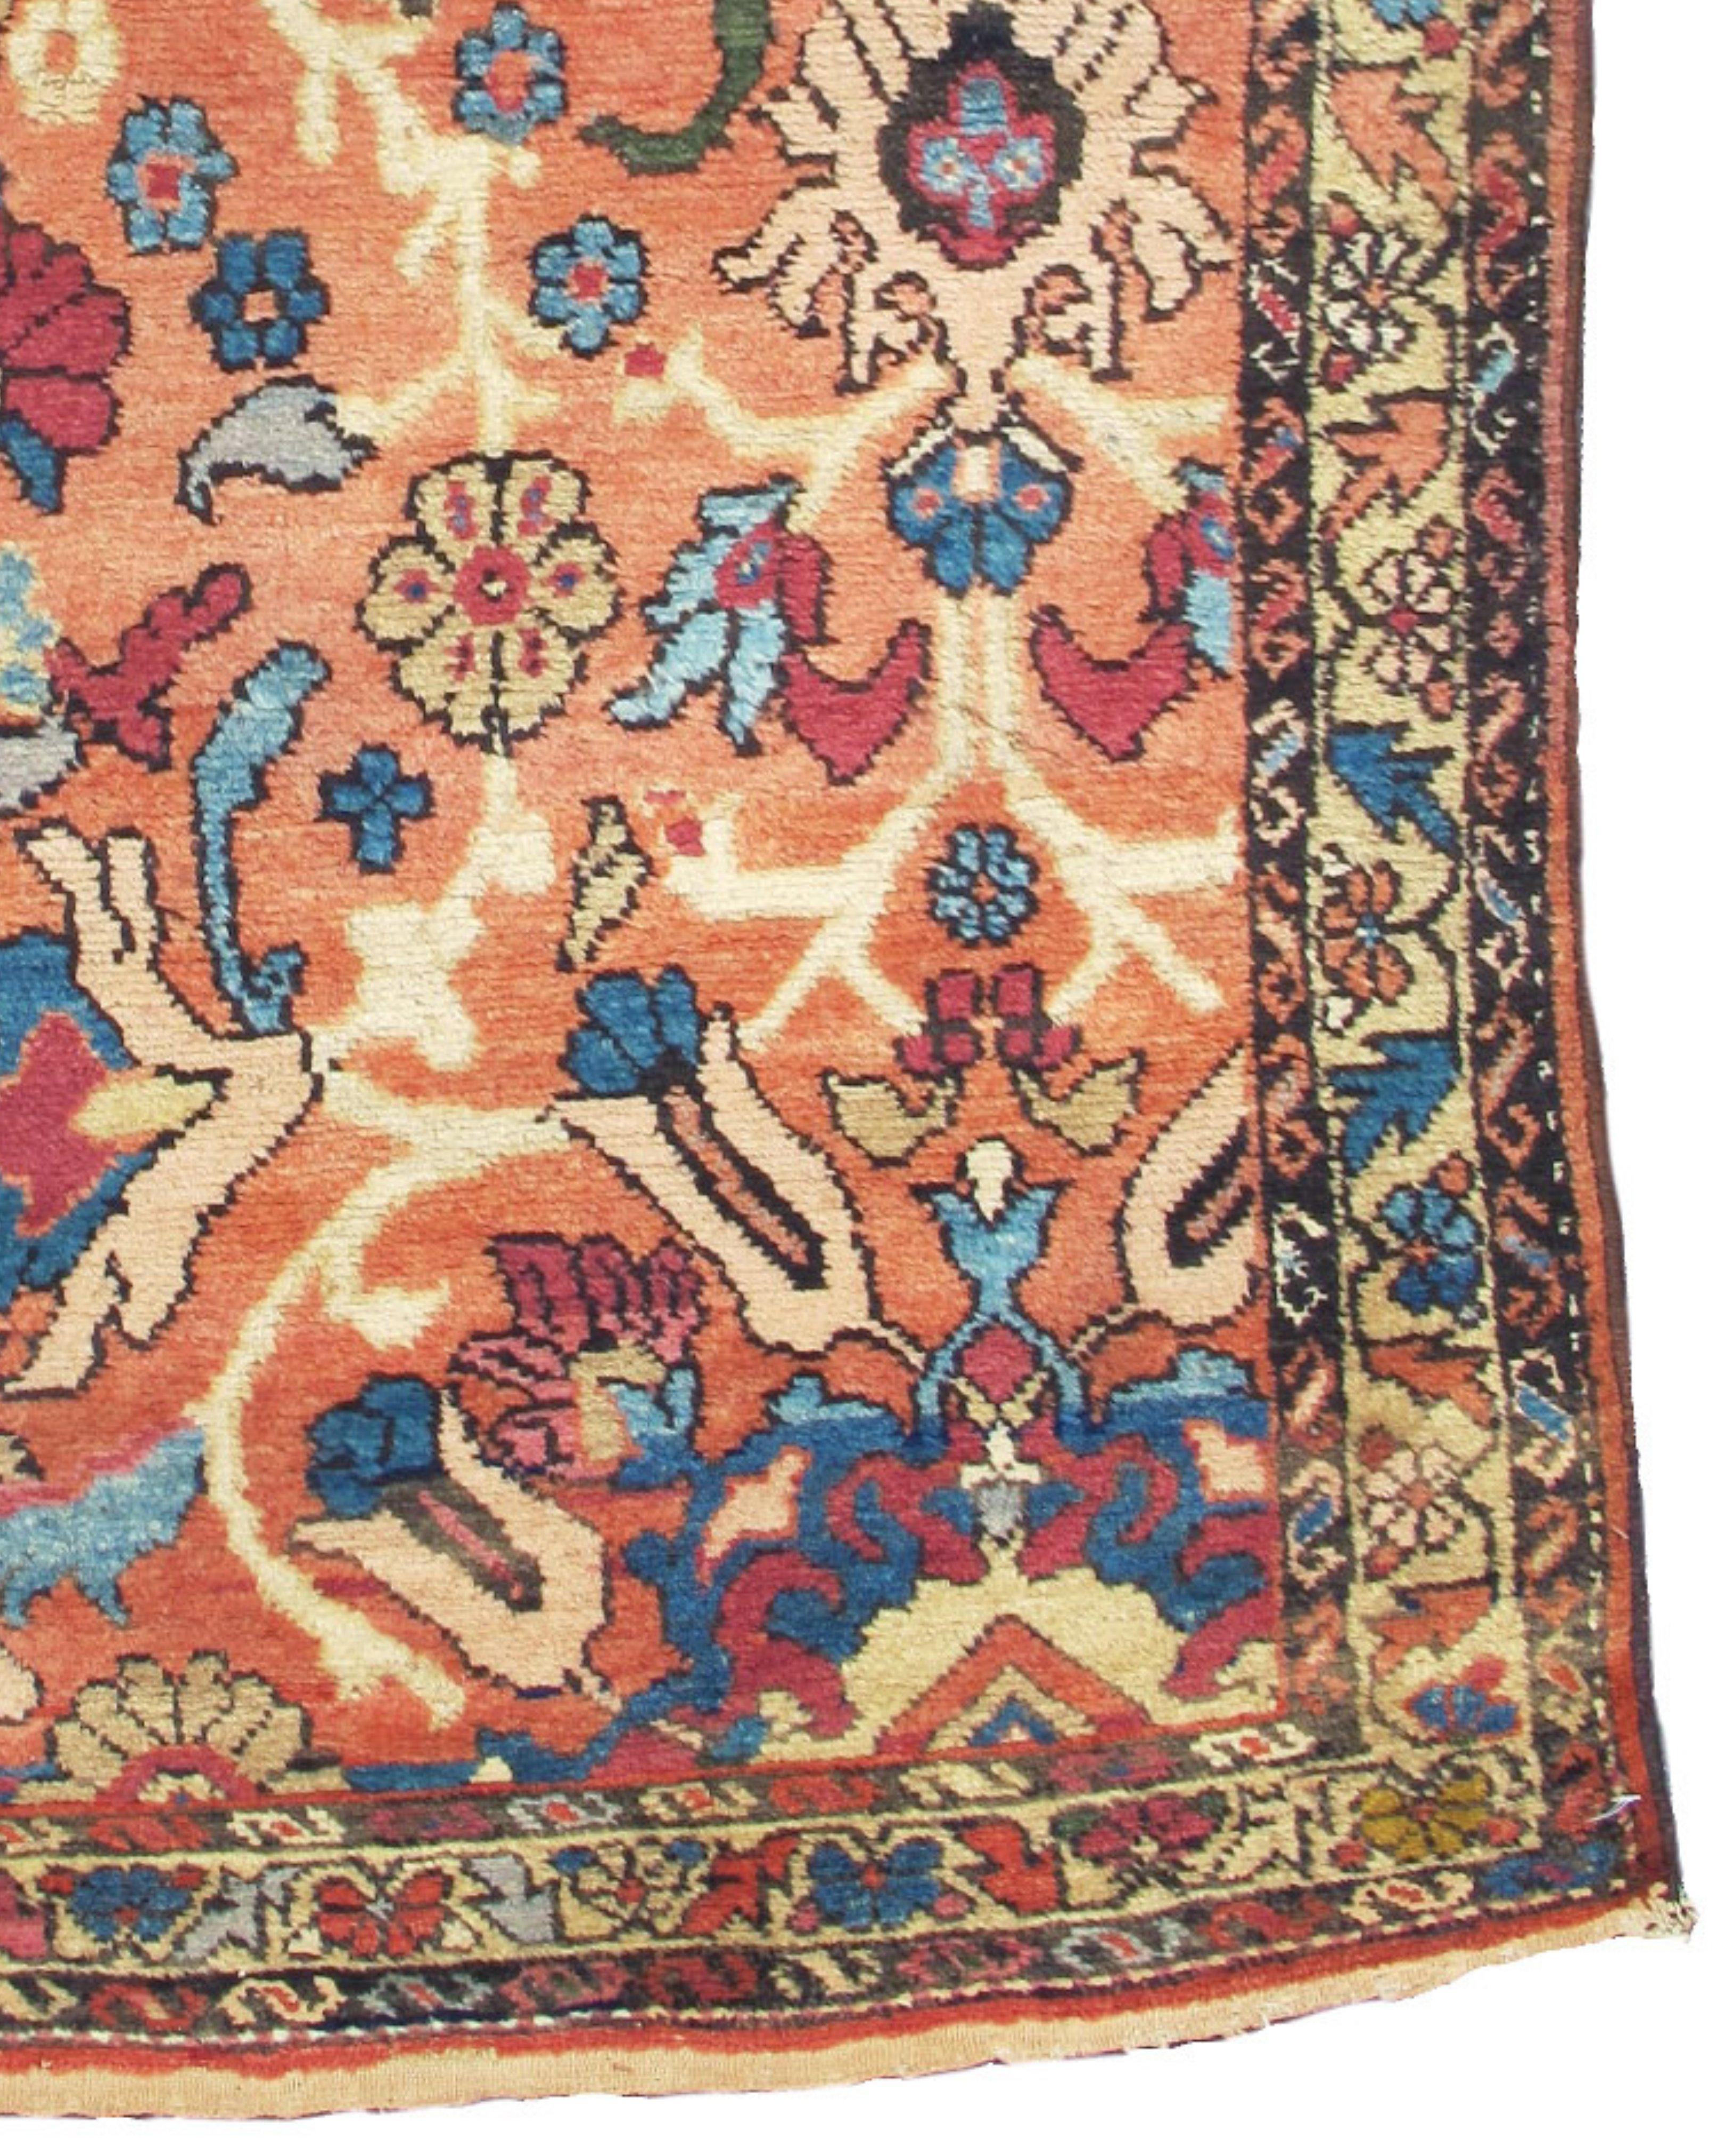 Mahal Sampler (Vagireh) Rug, Late 19th Century In Excellent Condition For Sale In San Francisco, CA